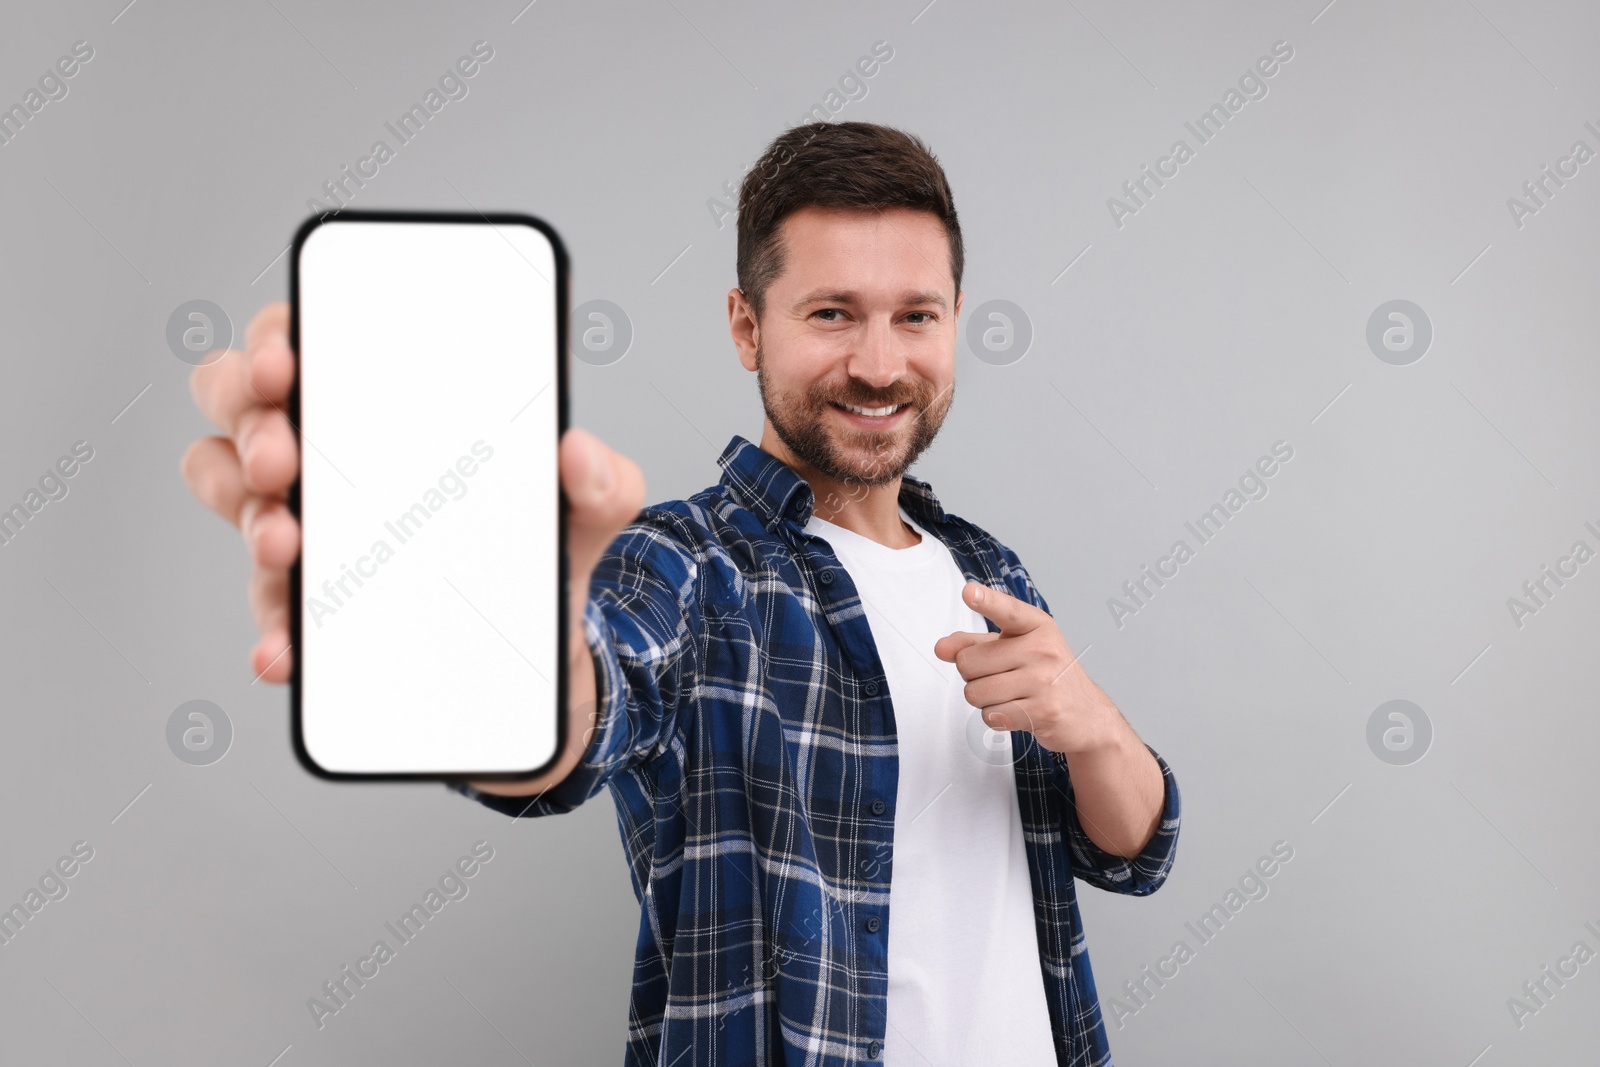 Photo of Handsome man showing smartphone in hand and pointing at it on light grey background